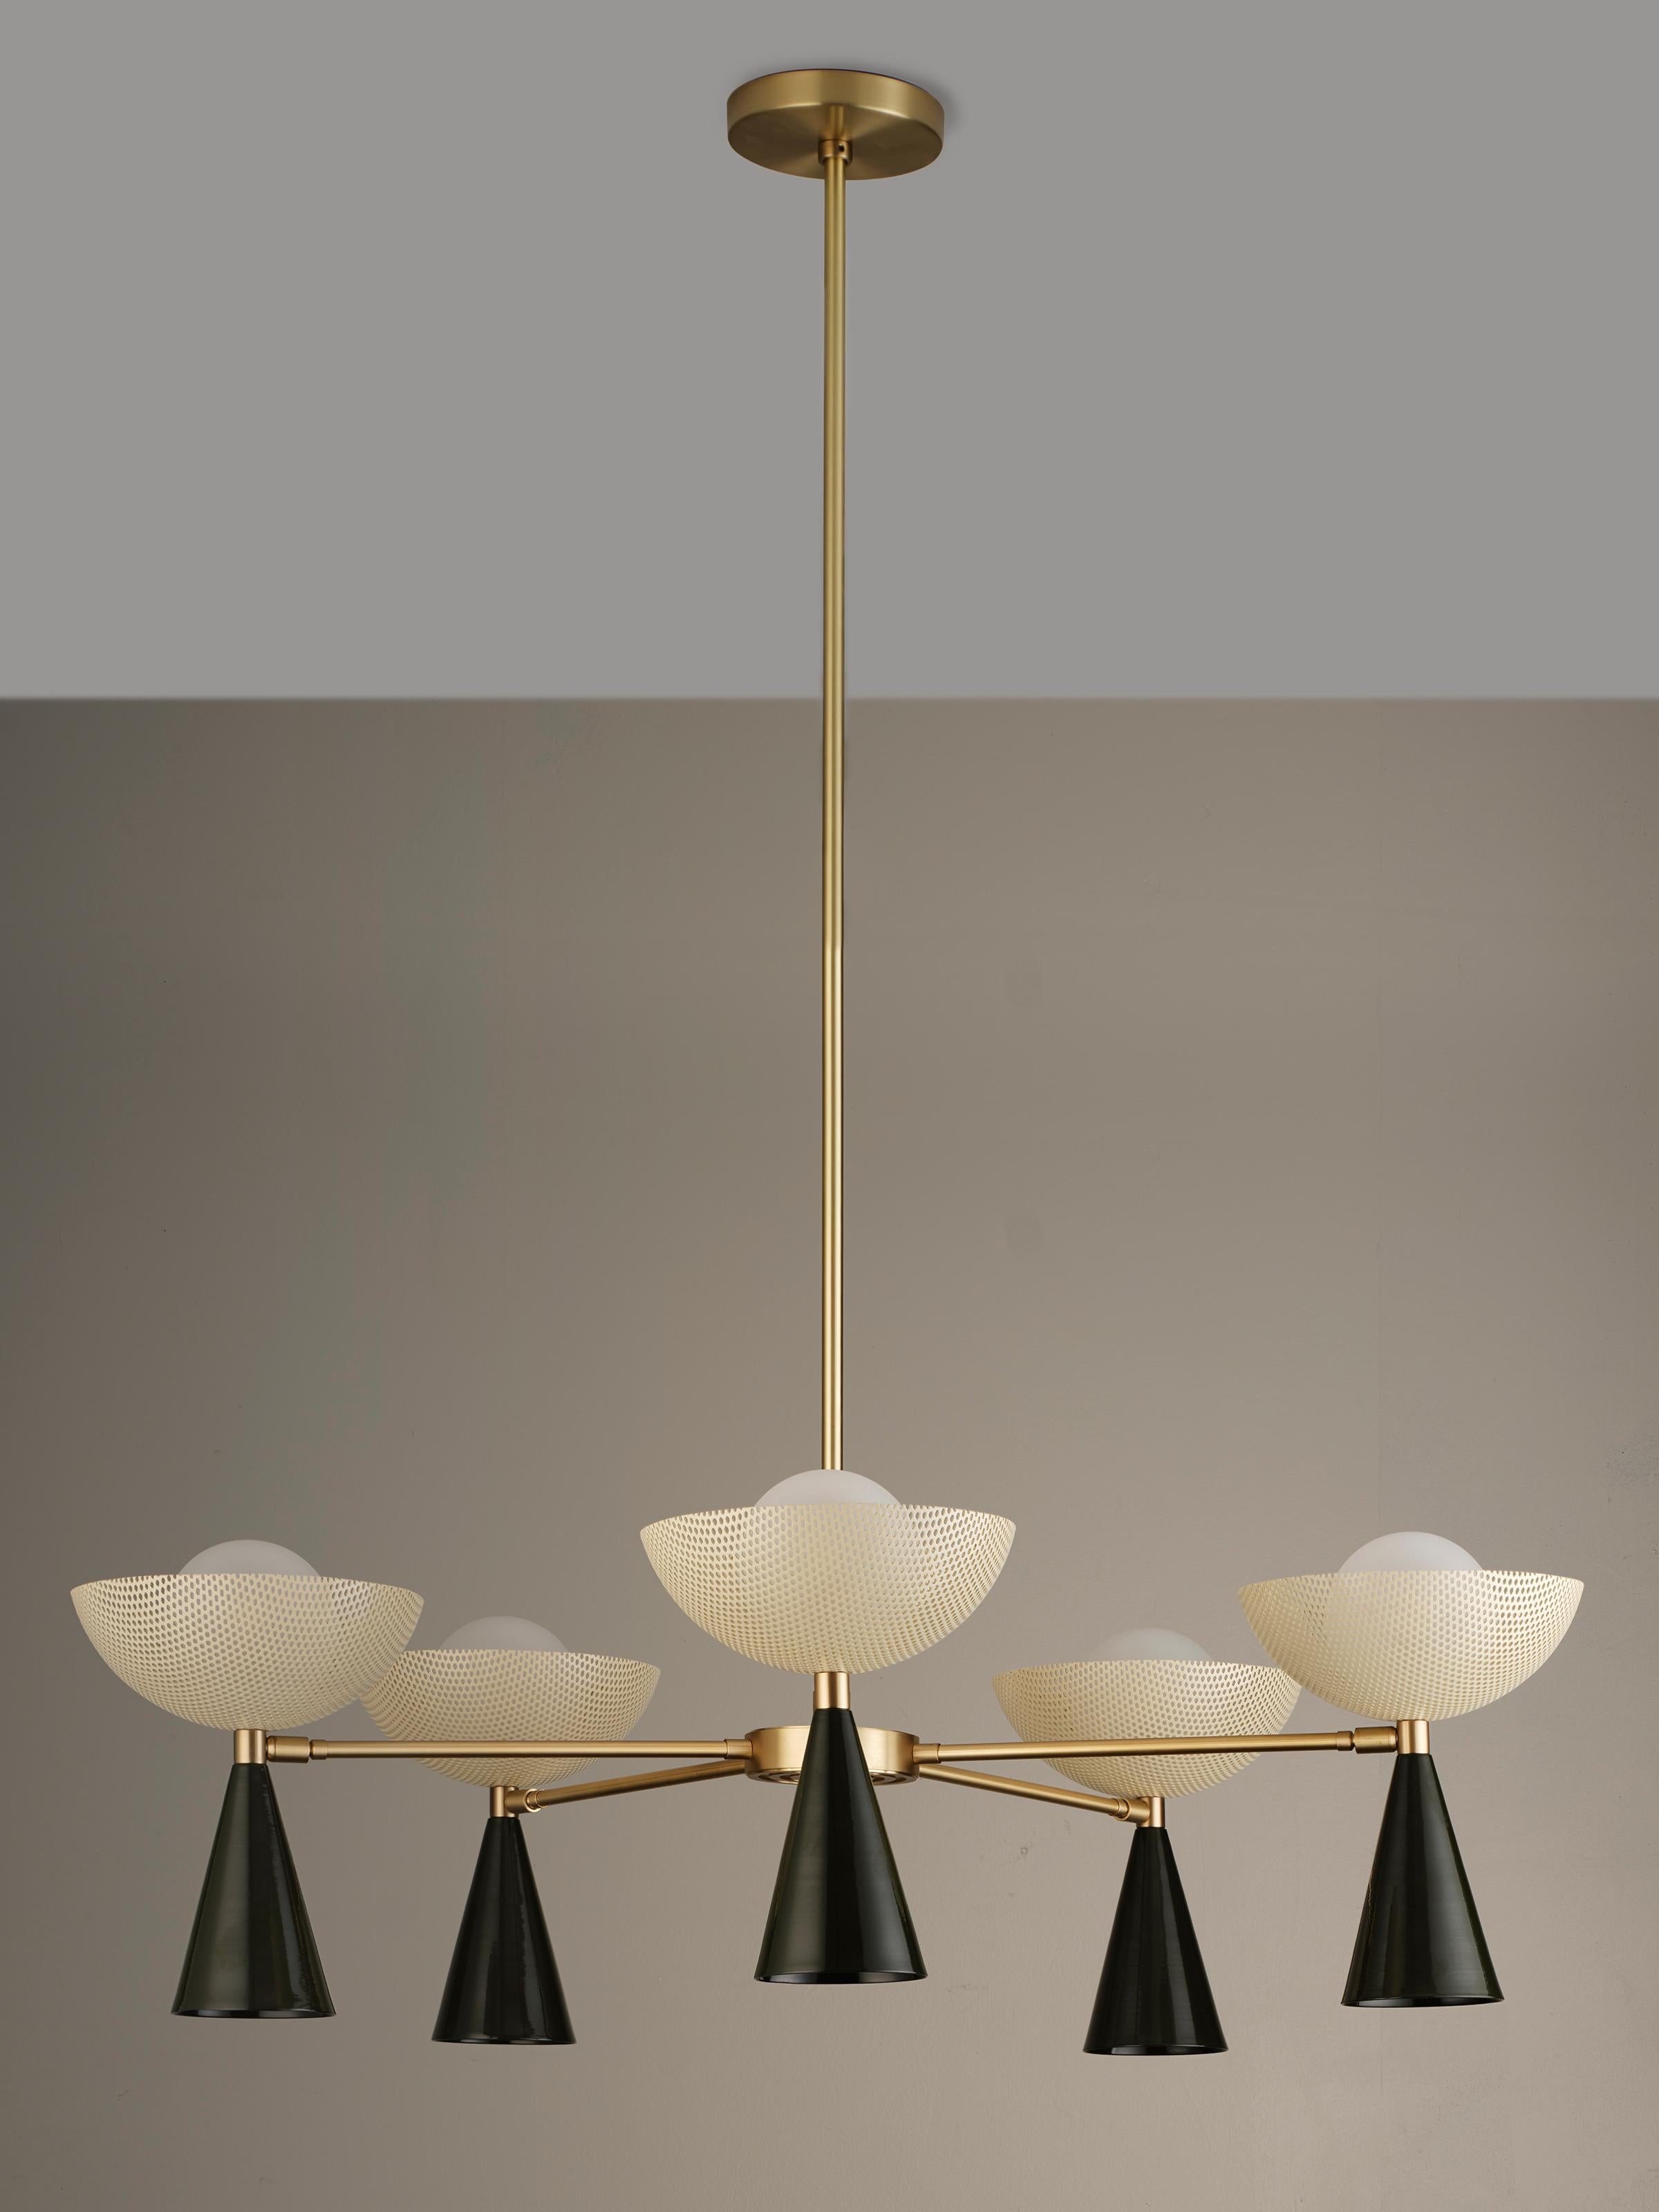 North American Molto 5-Arm Ceiling Fixture in Brushed Brass + Enameled Mesh, Blueprint Lighting